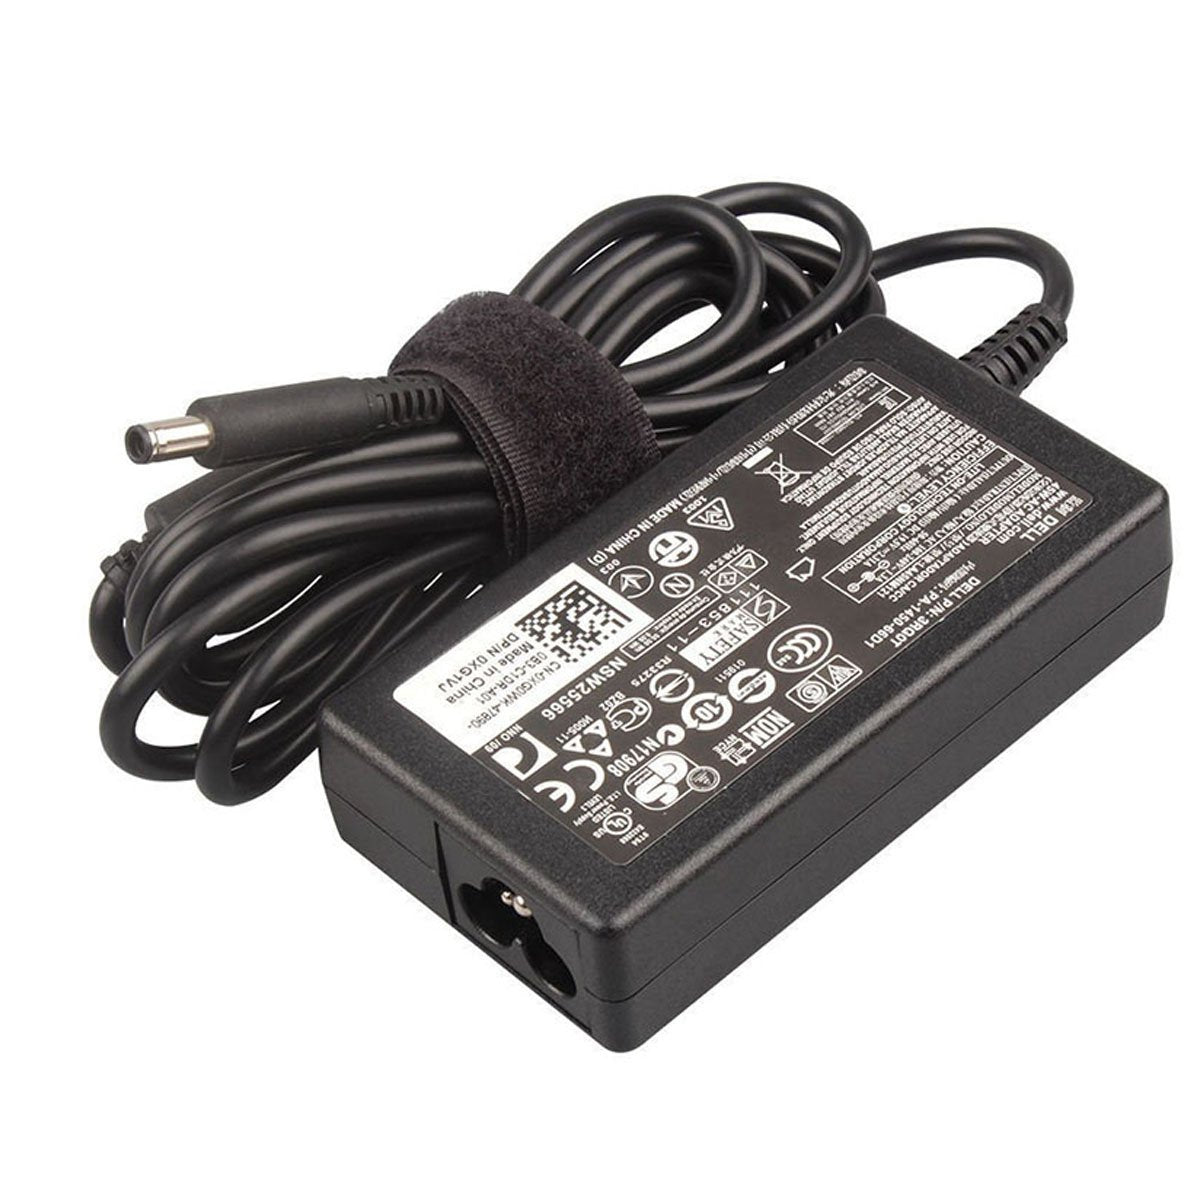 Dell Inspiron 17 5759 Original 45W Laptop Charger Adapter With Power Cord 19.5V 4.5mm Pin